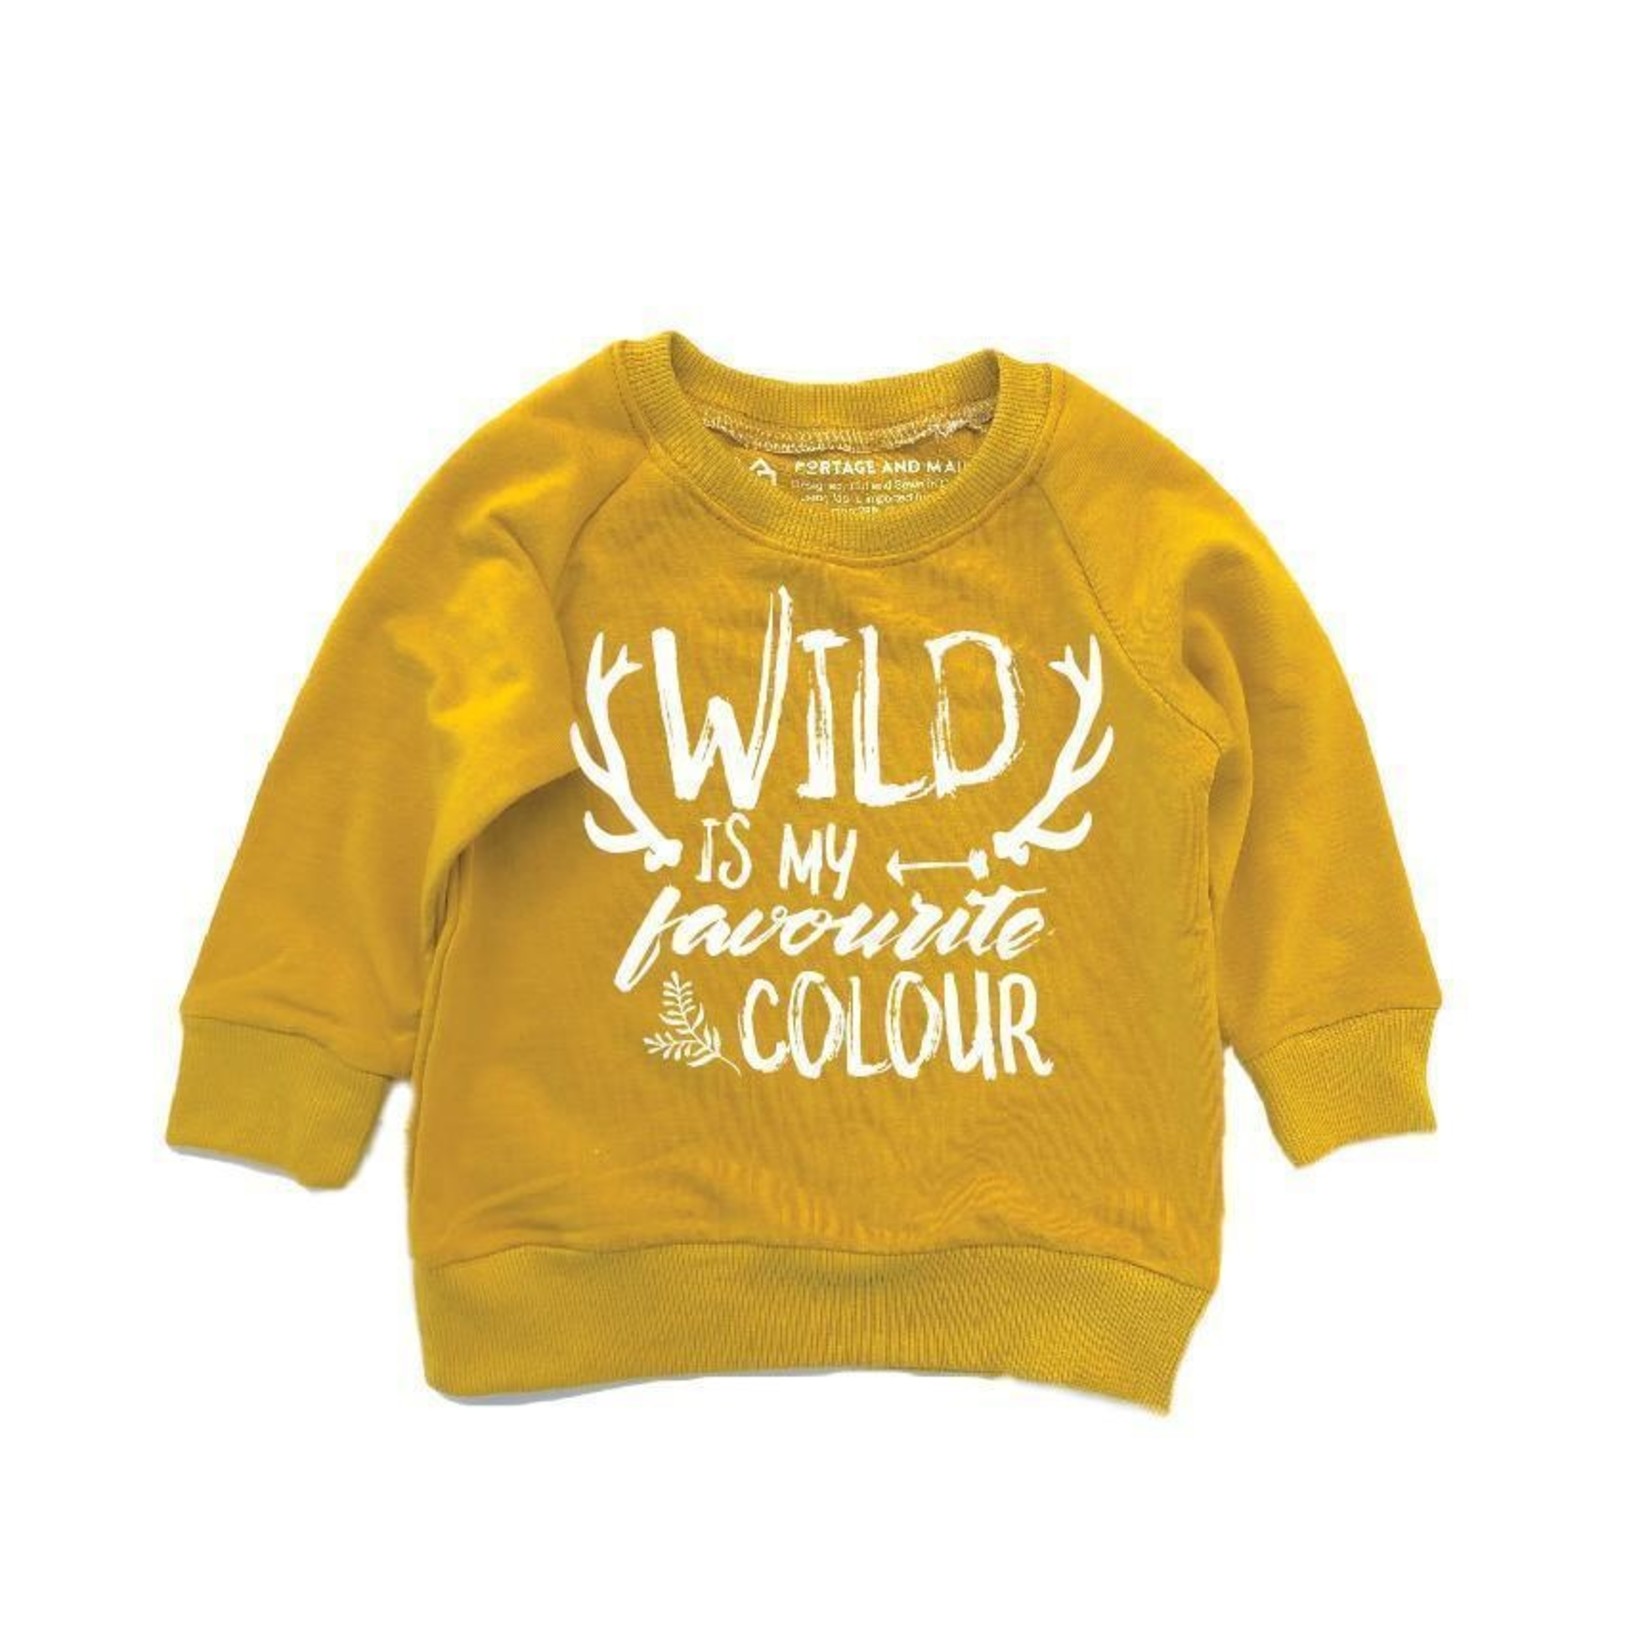 Portage and Main Wild is my Favorite Colour - Gold - 5/6T